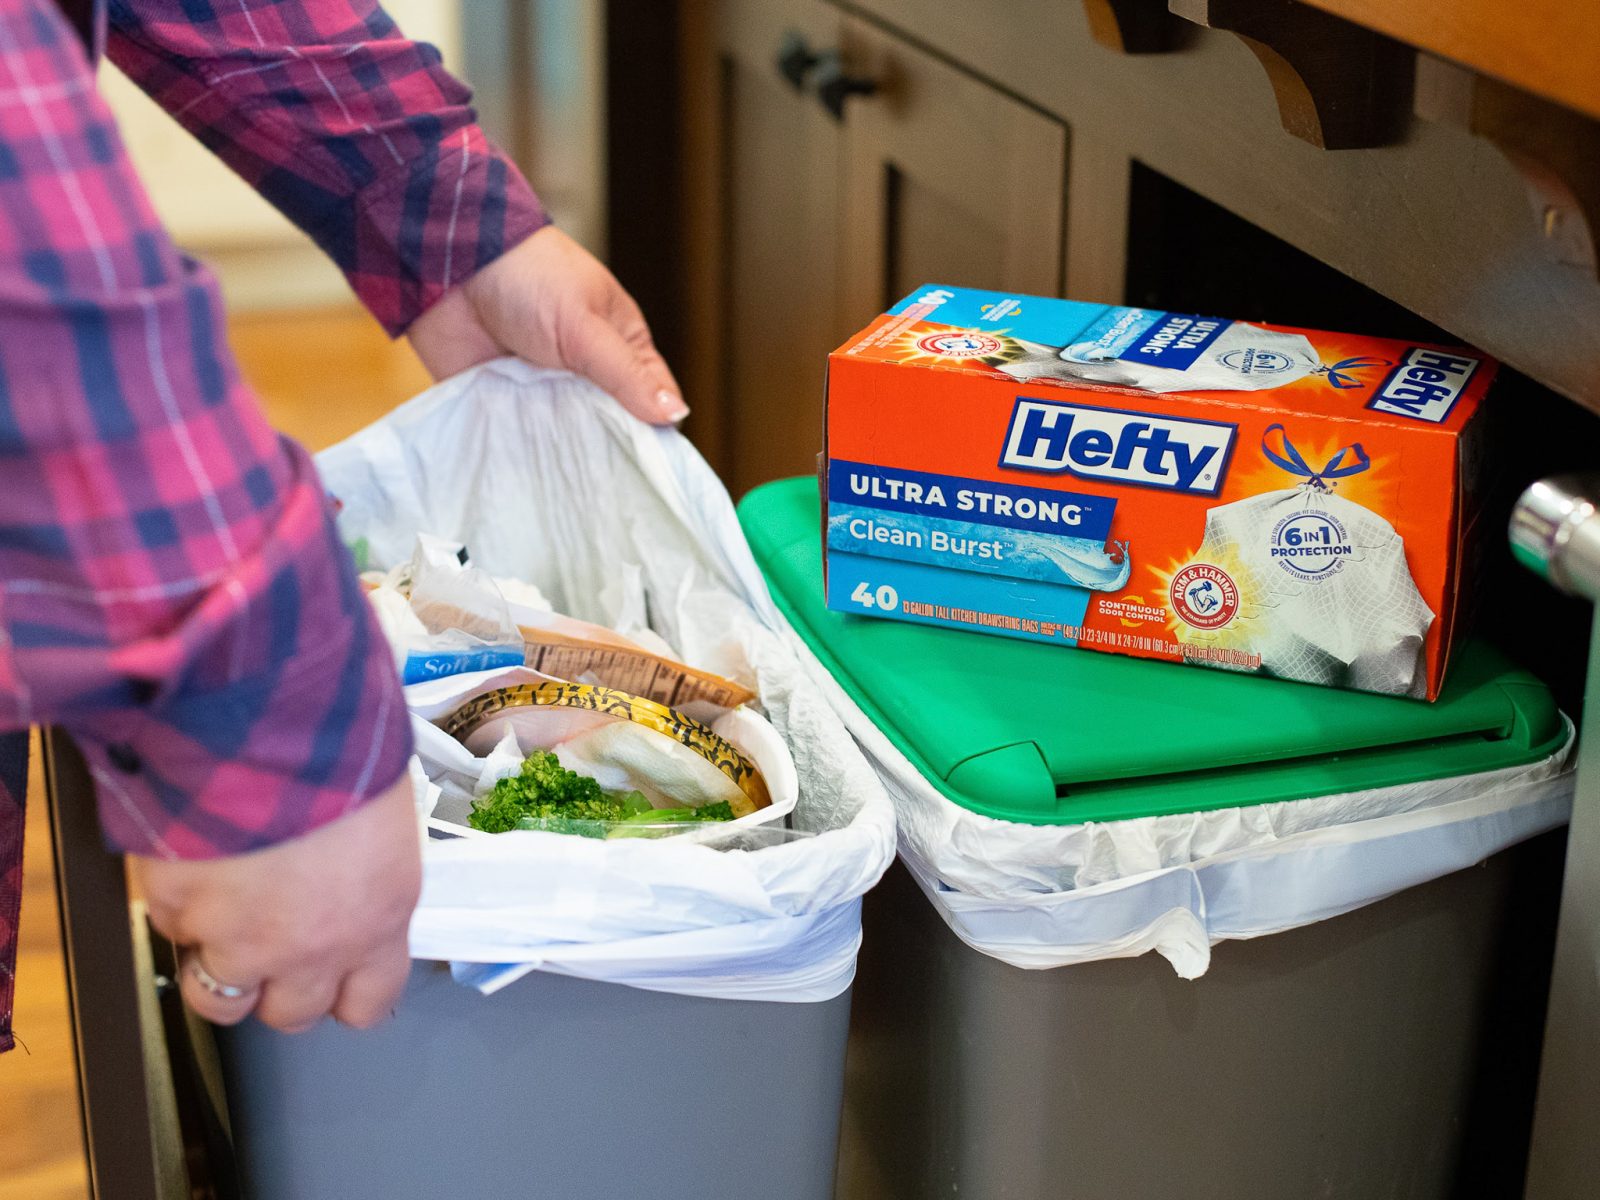 Get Ready For The Holidays With Hefty® Trash Bags – Save $1.50 At Publix